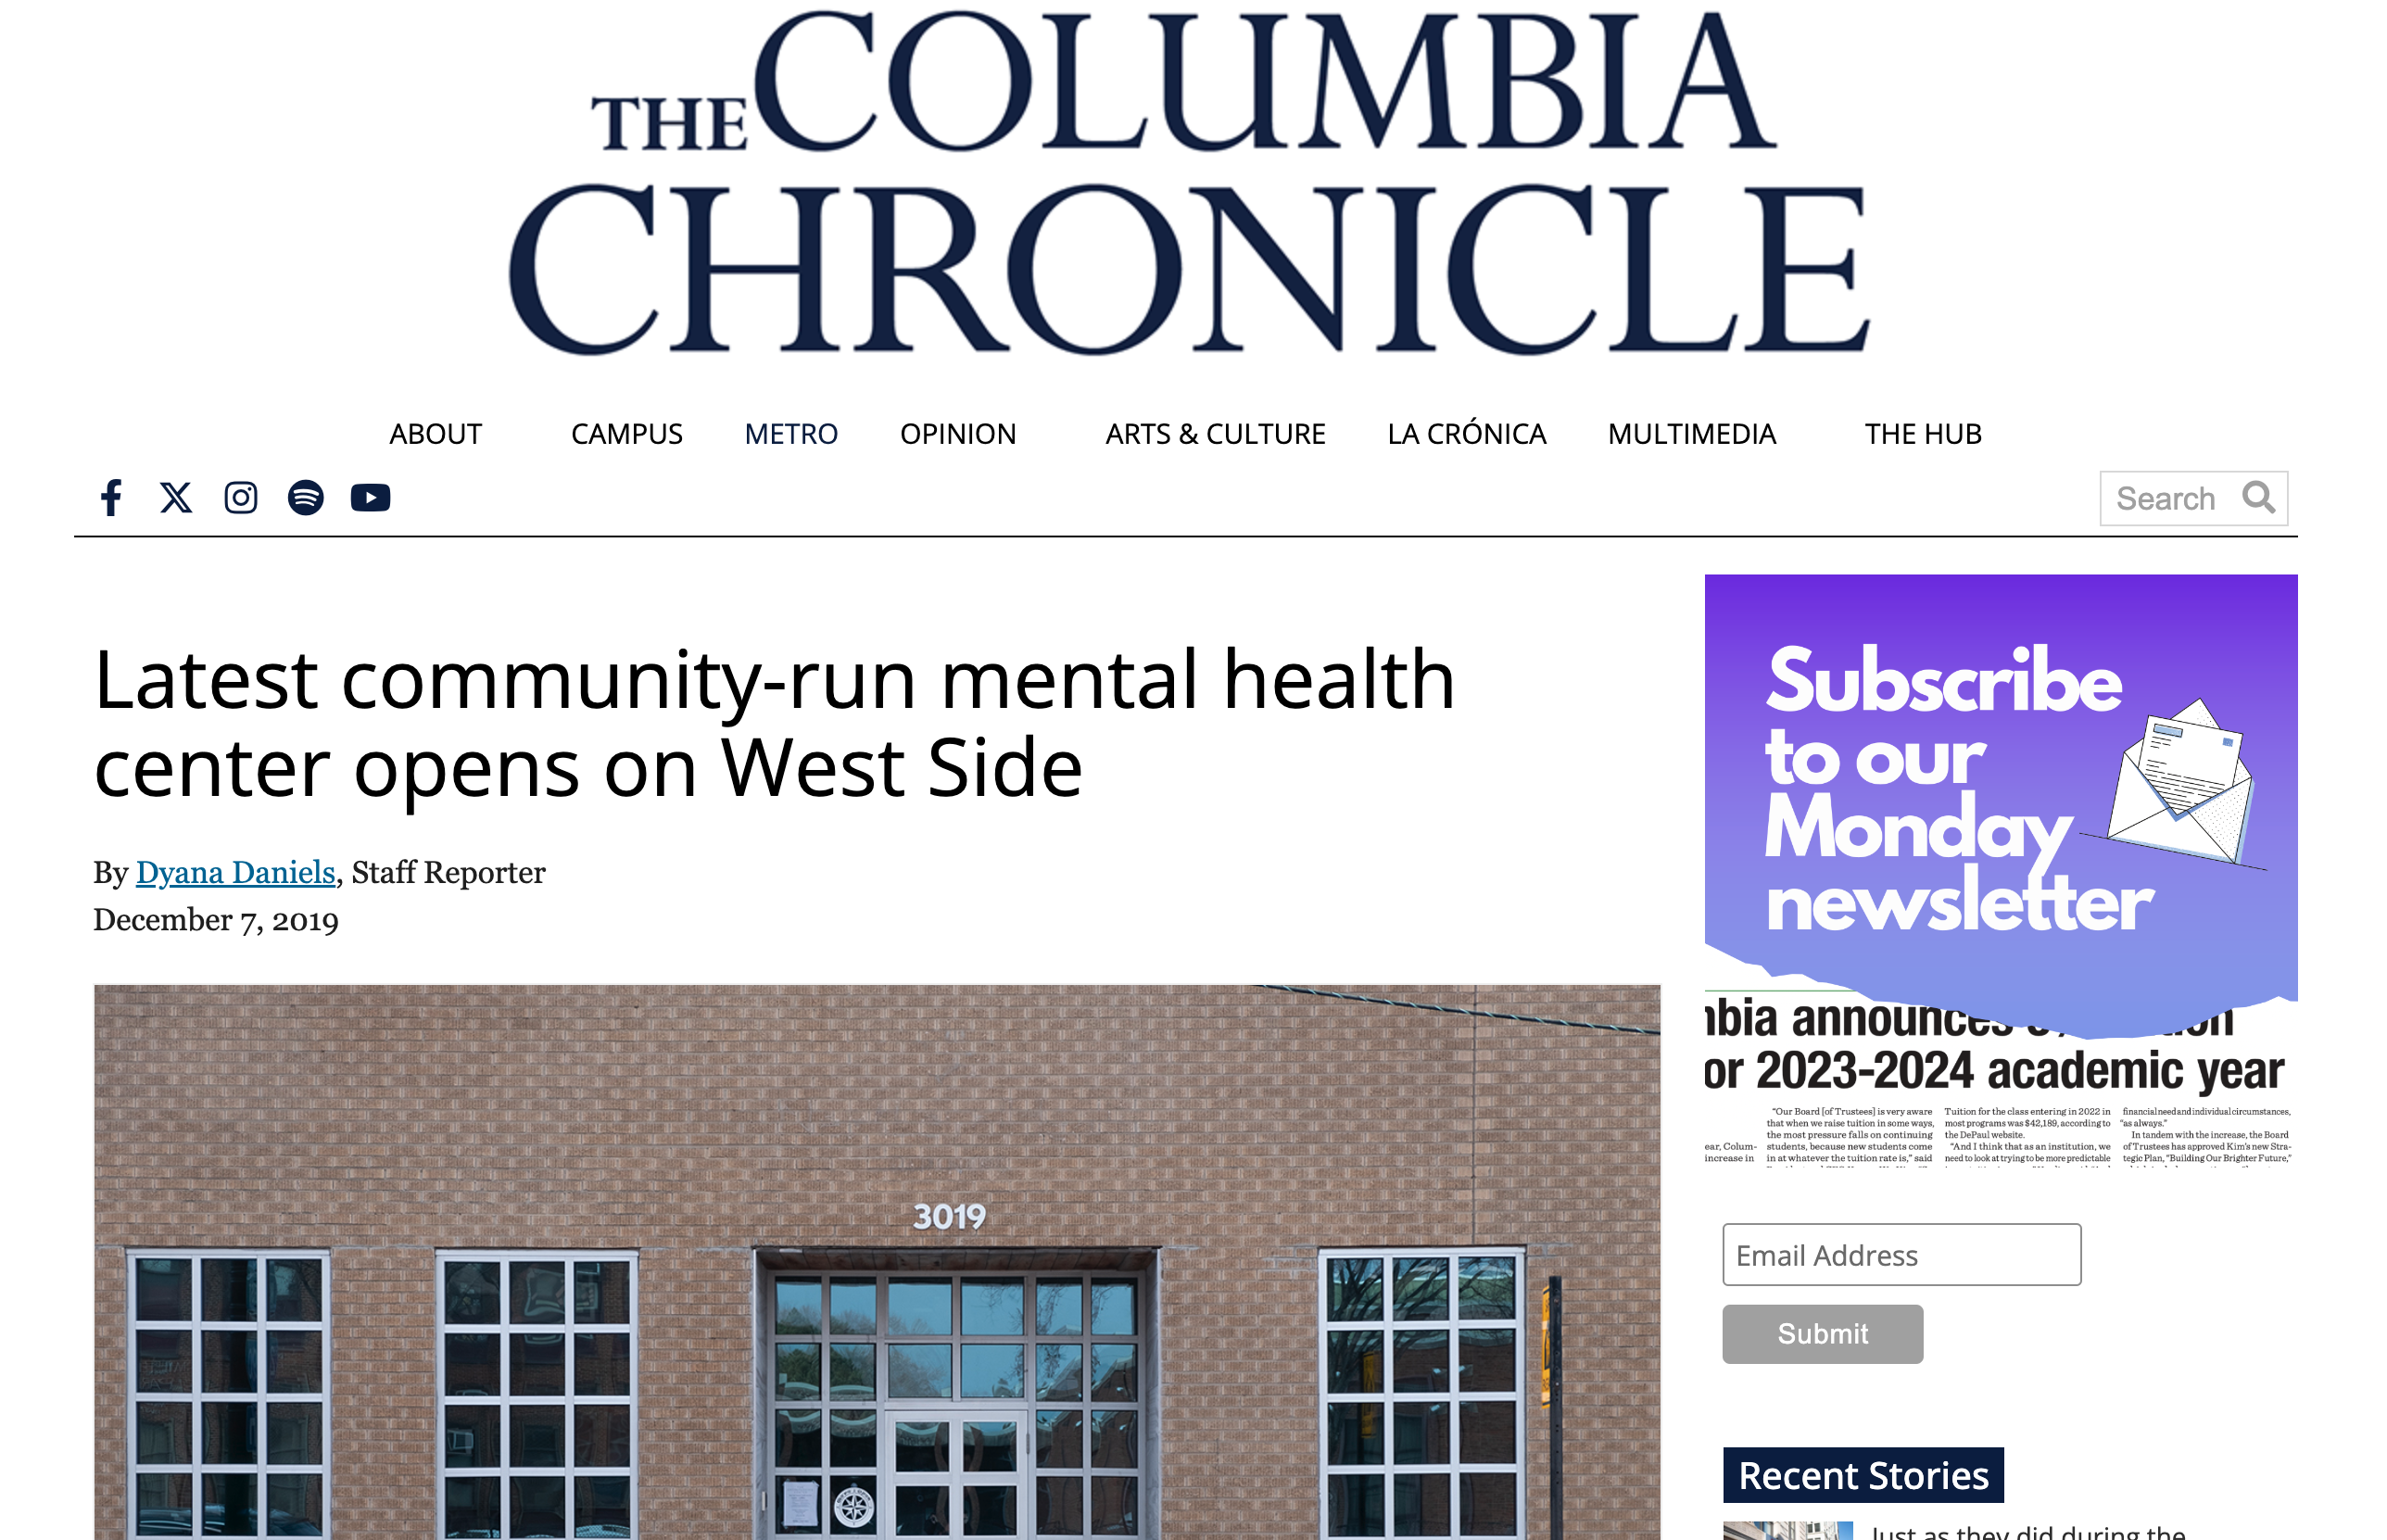 Latest community-run mental health center opens on West Side